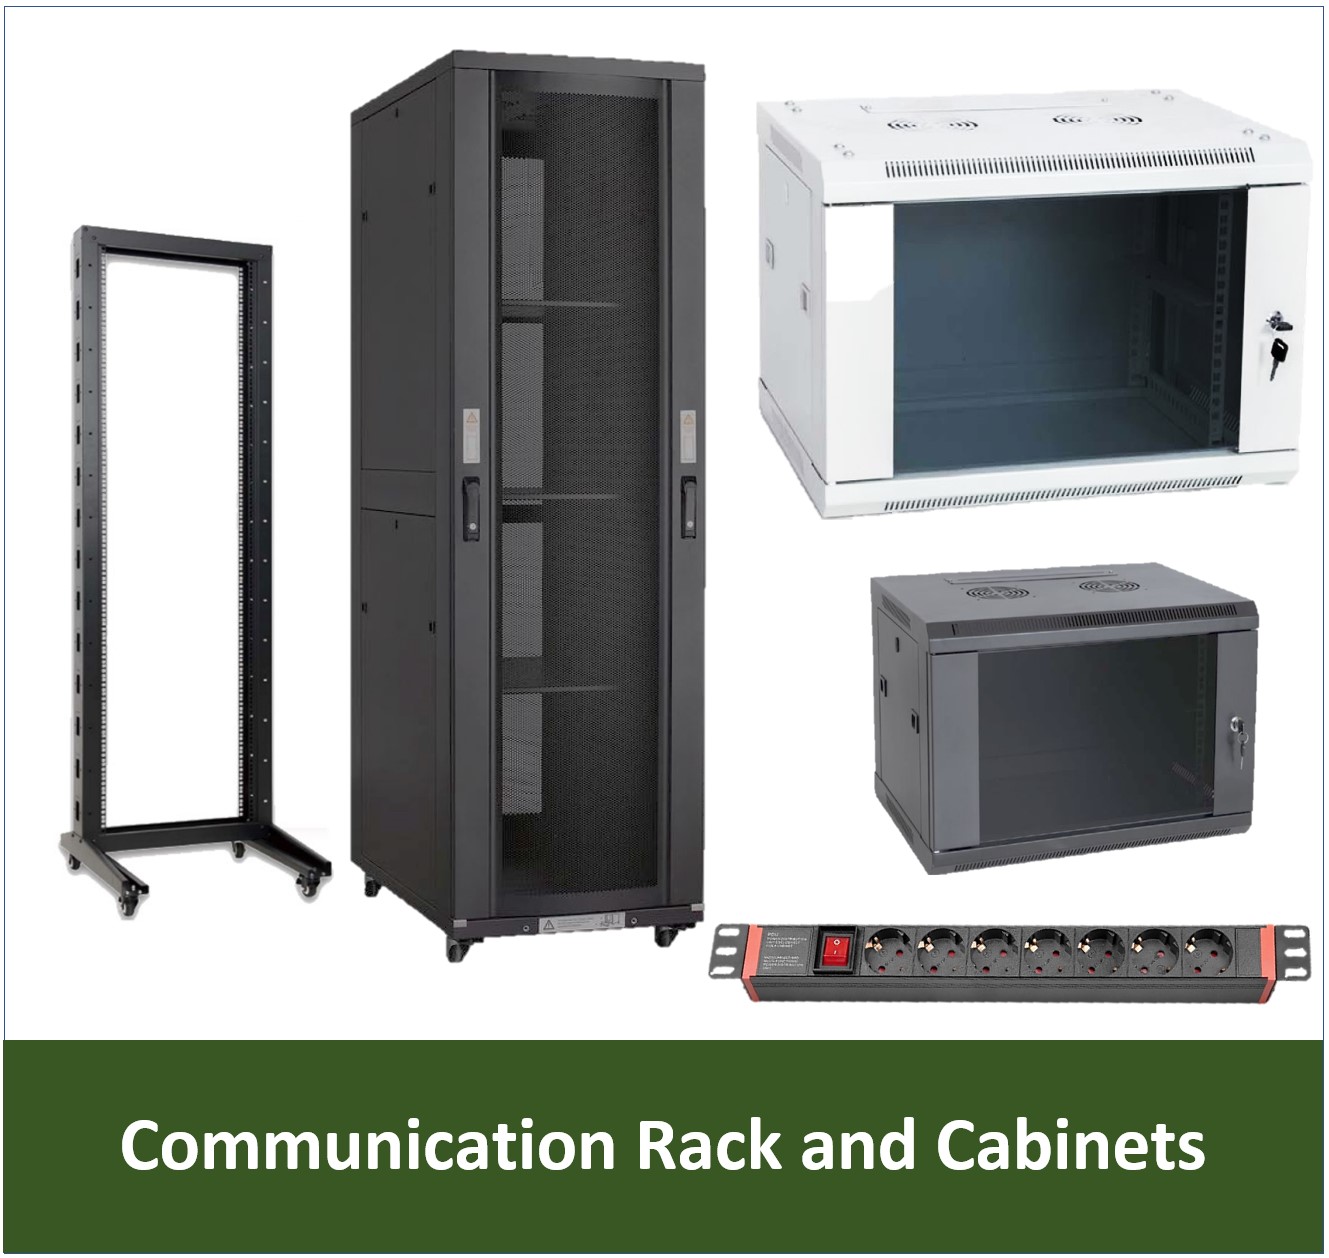 Communication Rack and Cabinets